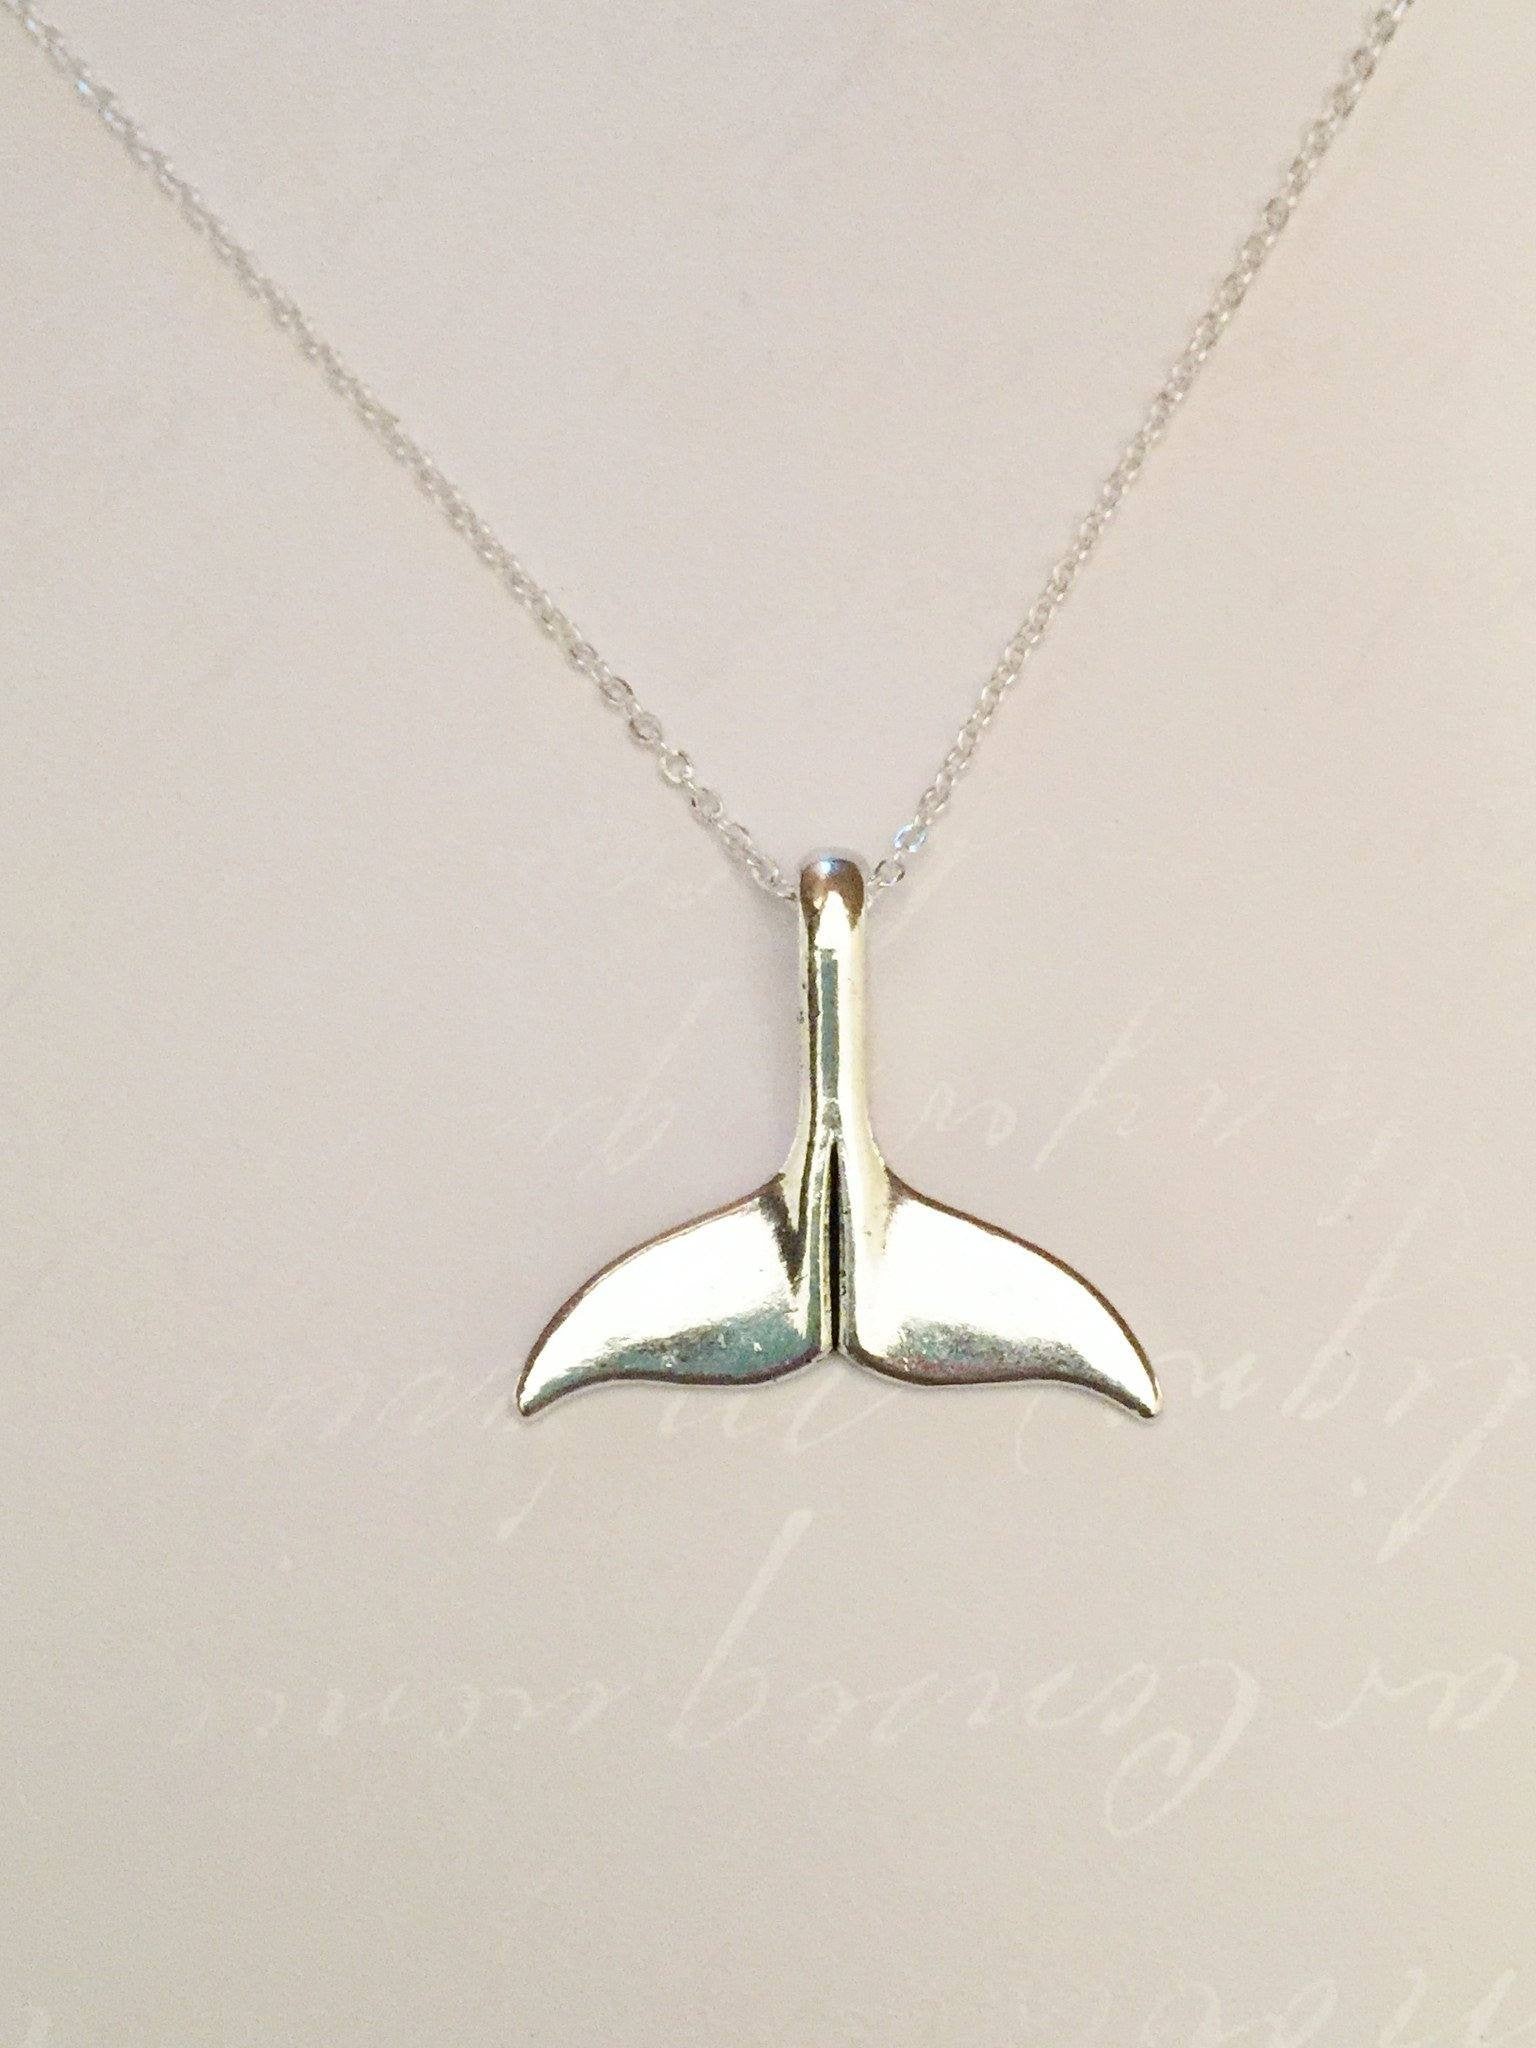 Whale Tale Necklace - Anomaly Creations & Designs